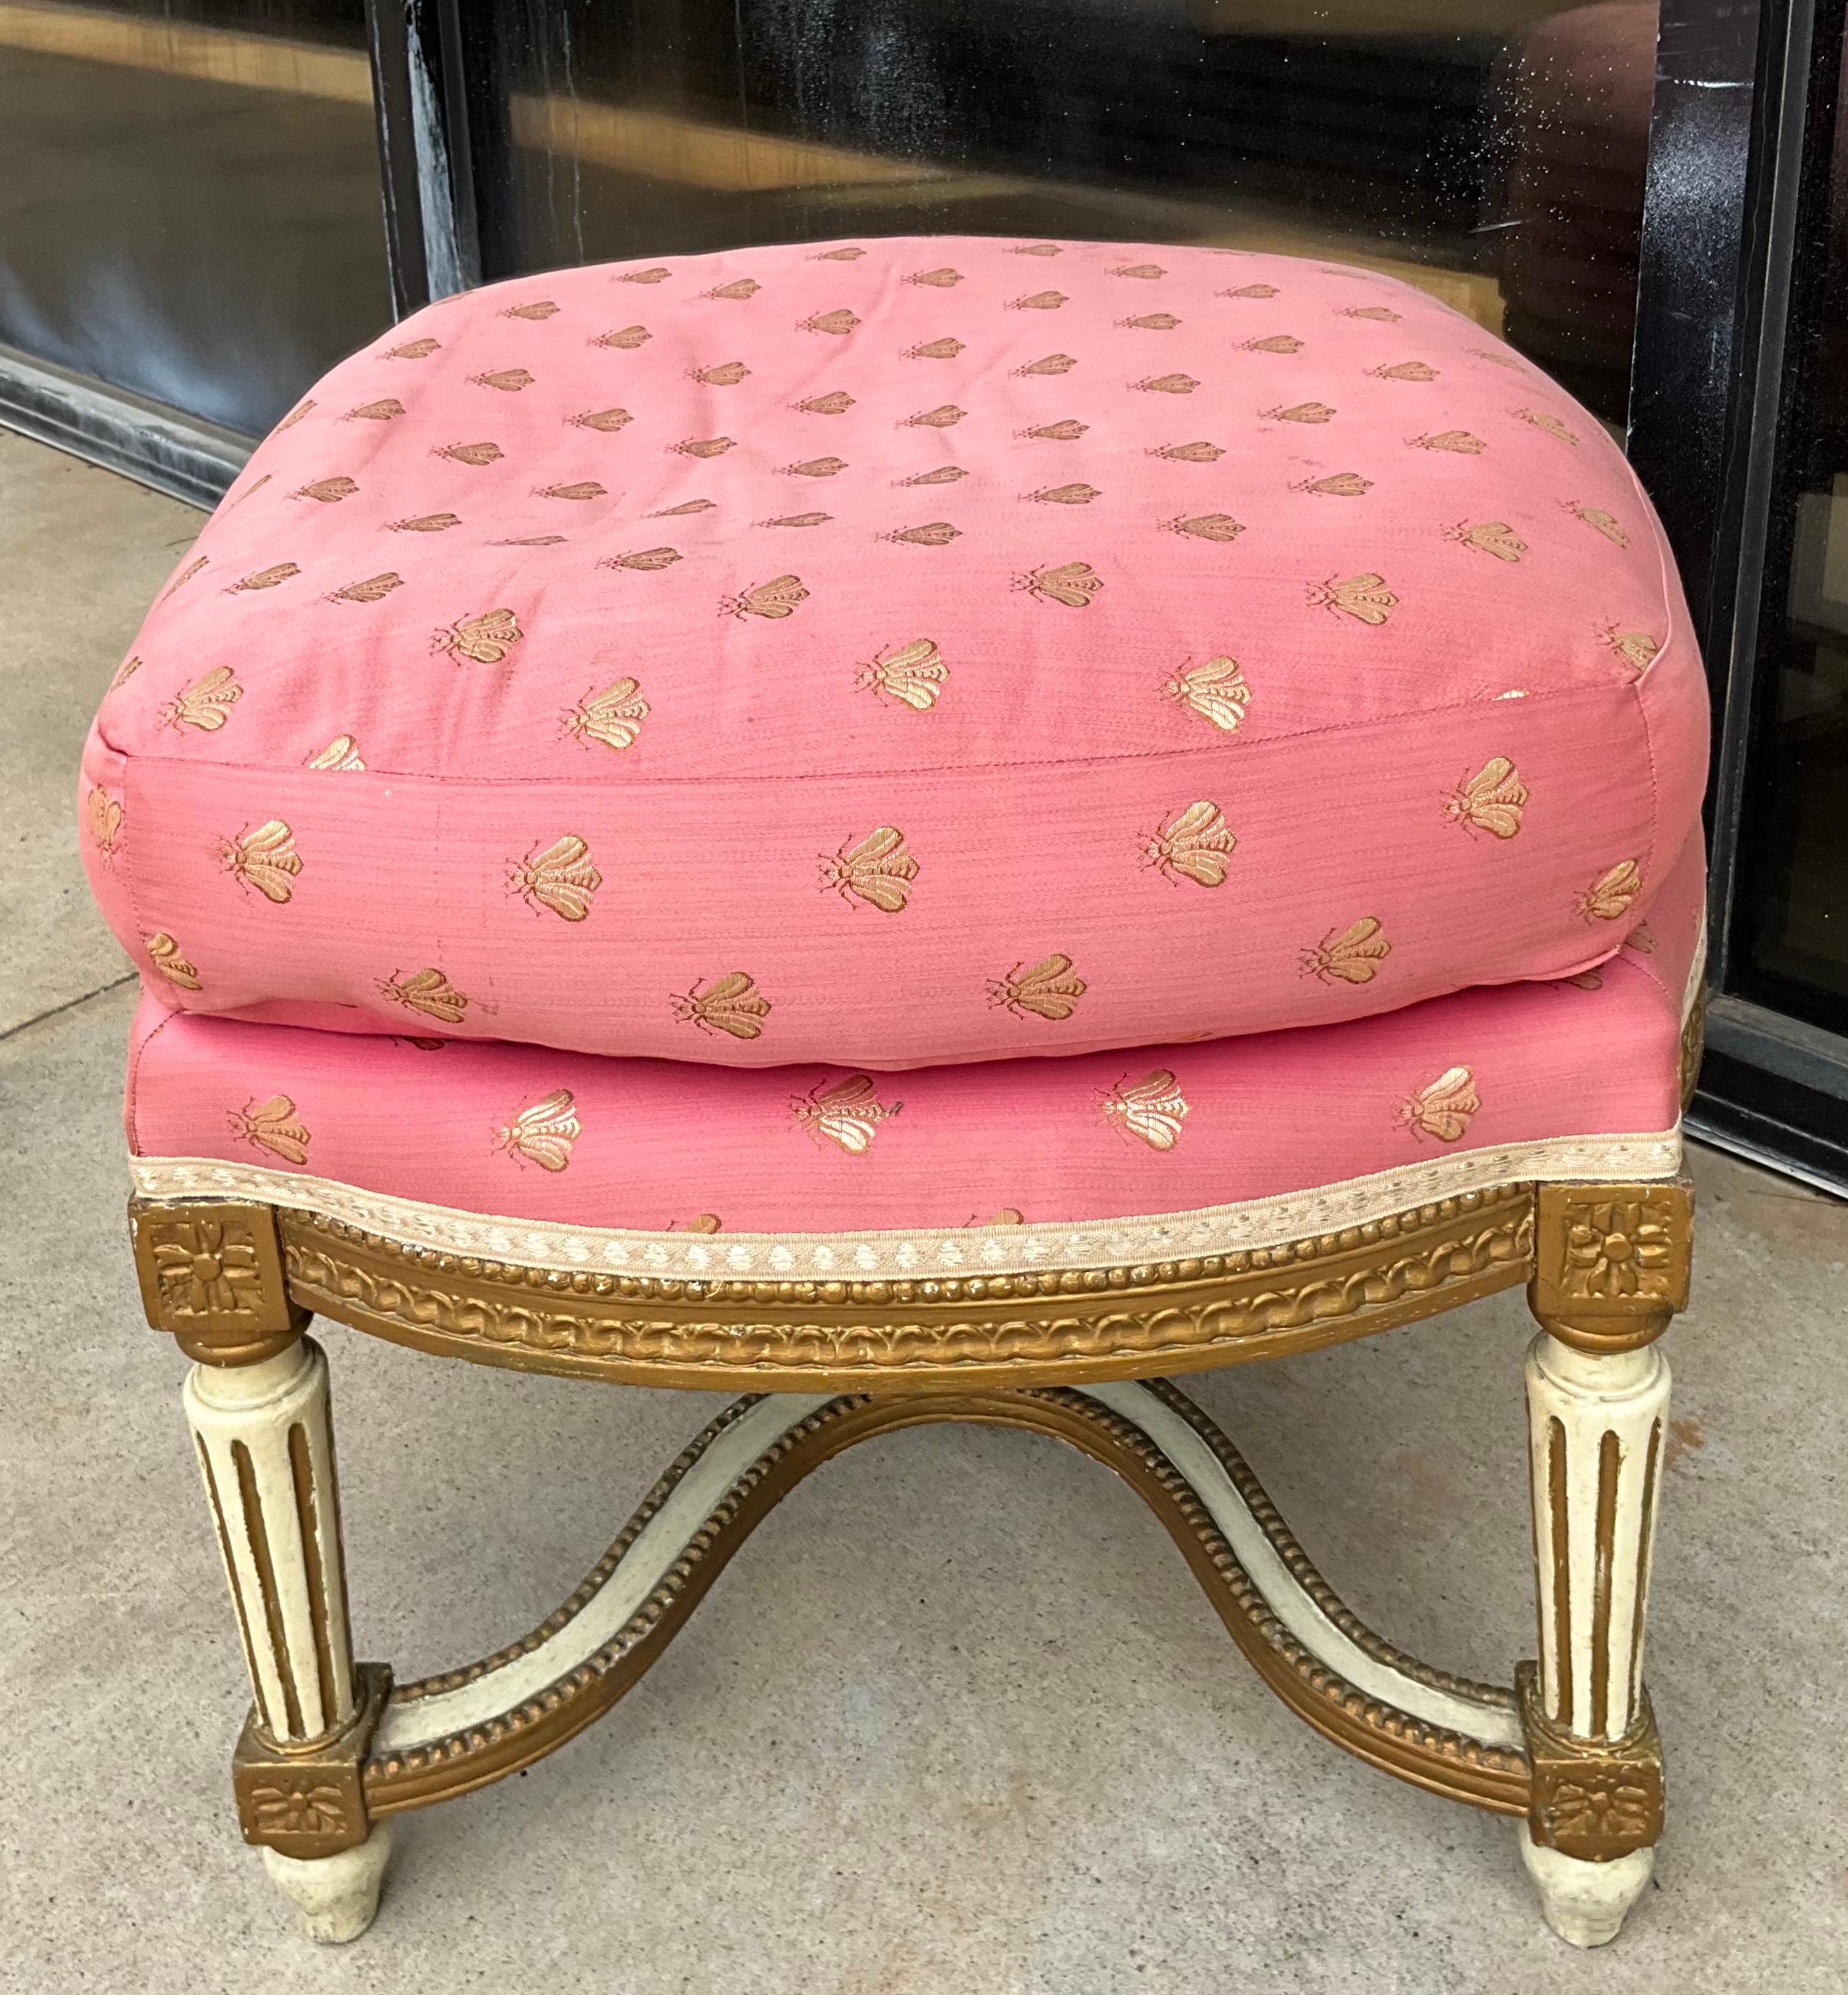  Mid-Century French Carved Giltwood and Painted Ottoman In Pink Silk In Good Condition For Sale In Kennesaw, GA